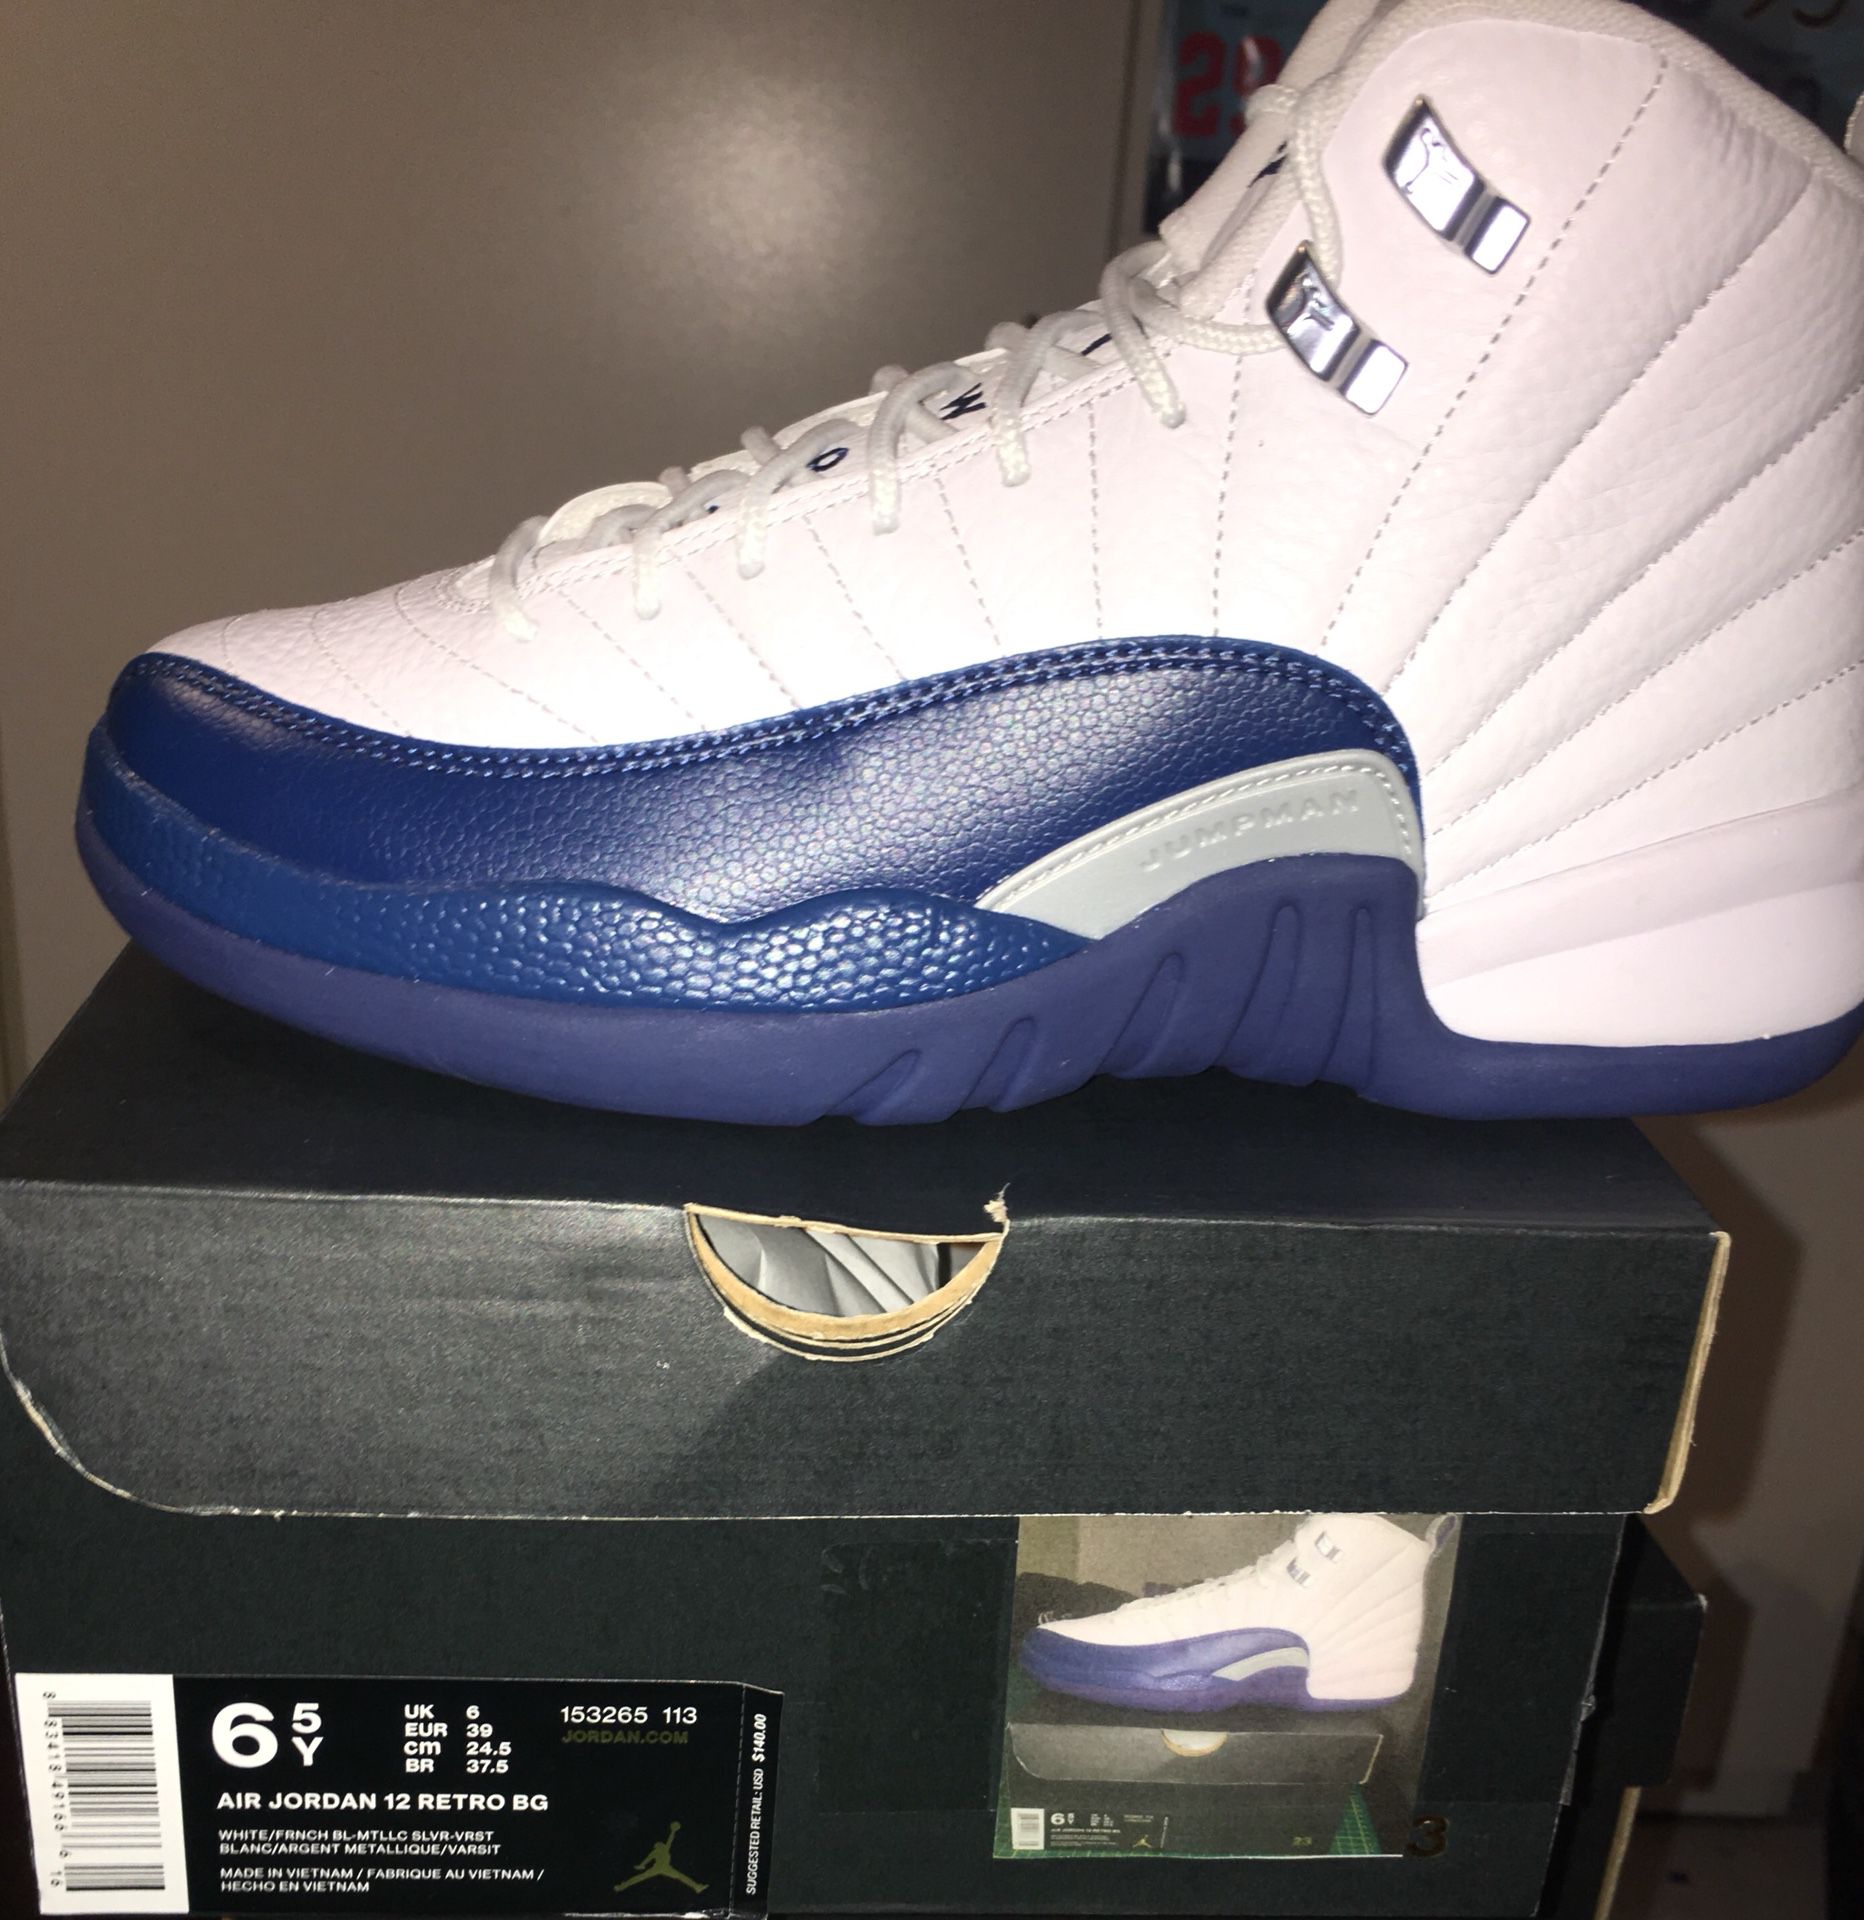 DS Jordan 12 French blue youth size 6.5